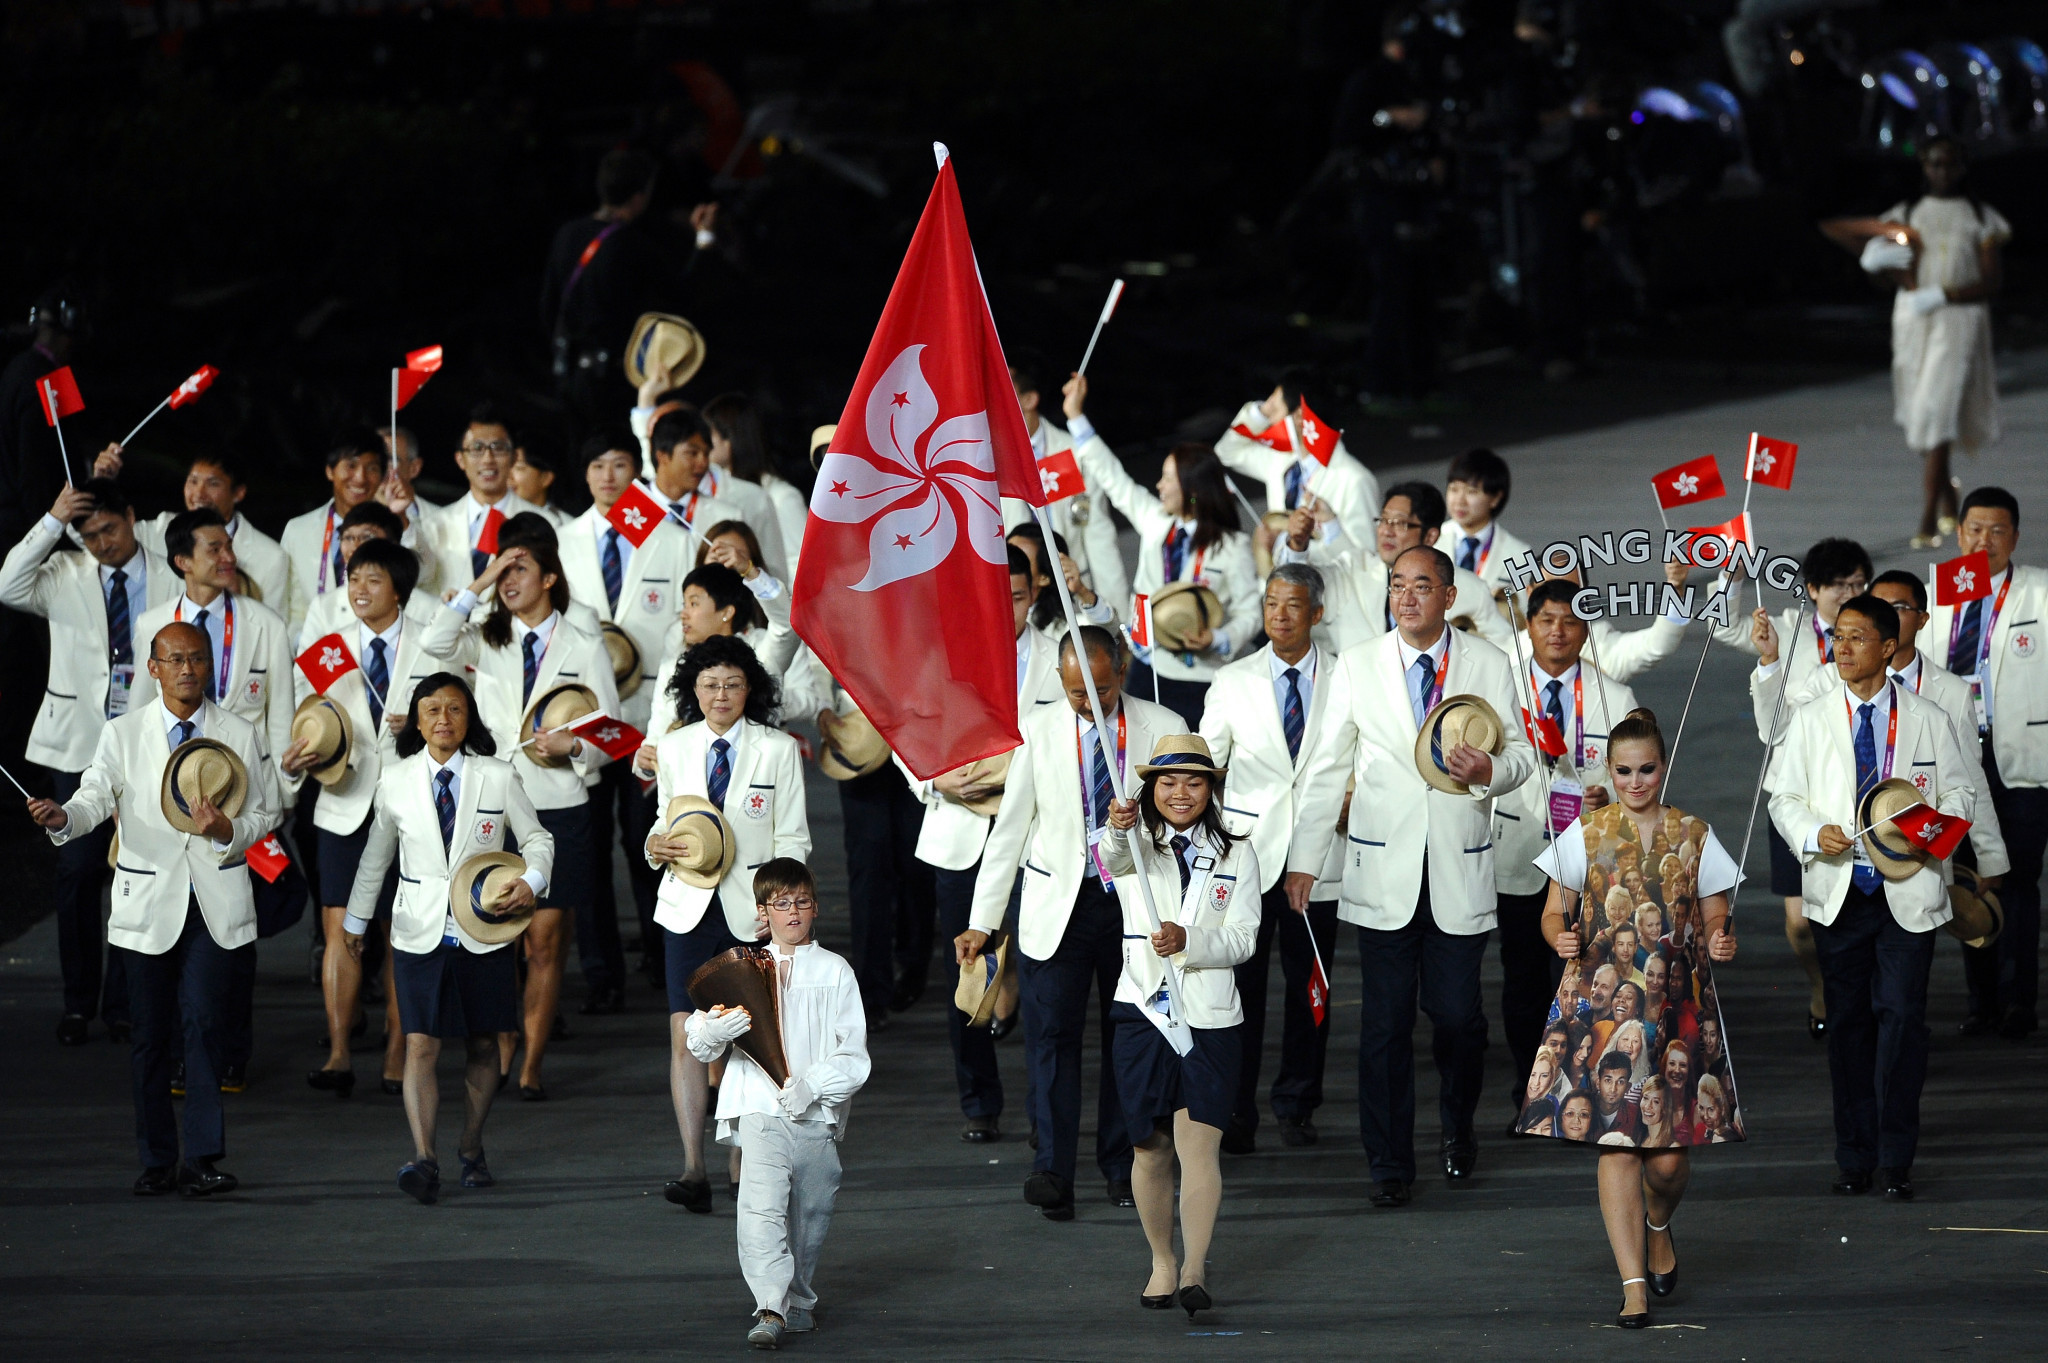 The Sports Federation and Olympic Committee of Hong Kong has pledged to improve the transparency of its athlete selection process after receiving criticism from the territory's Legislative Council ©Getty Images